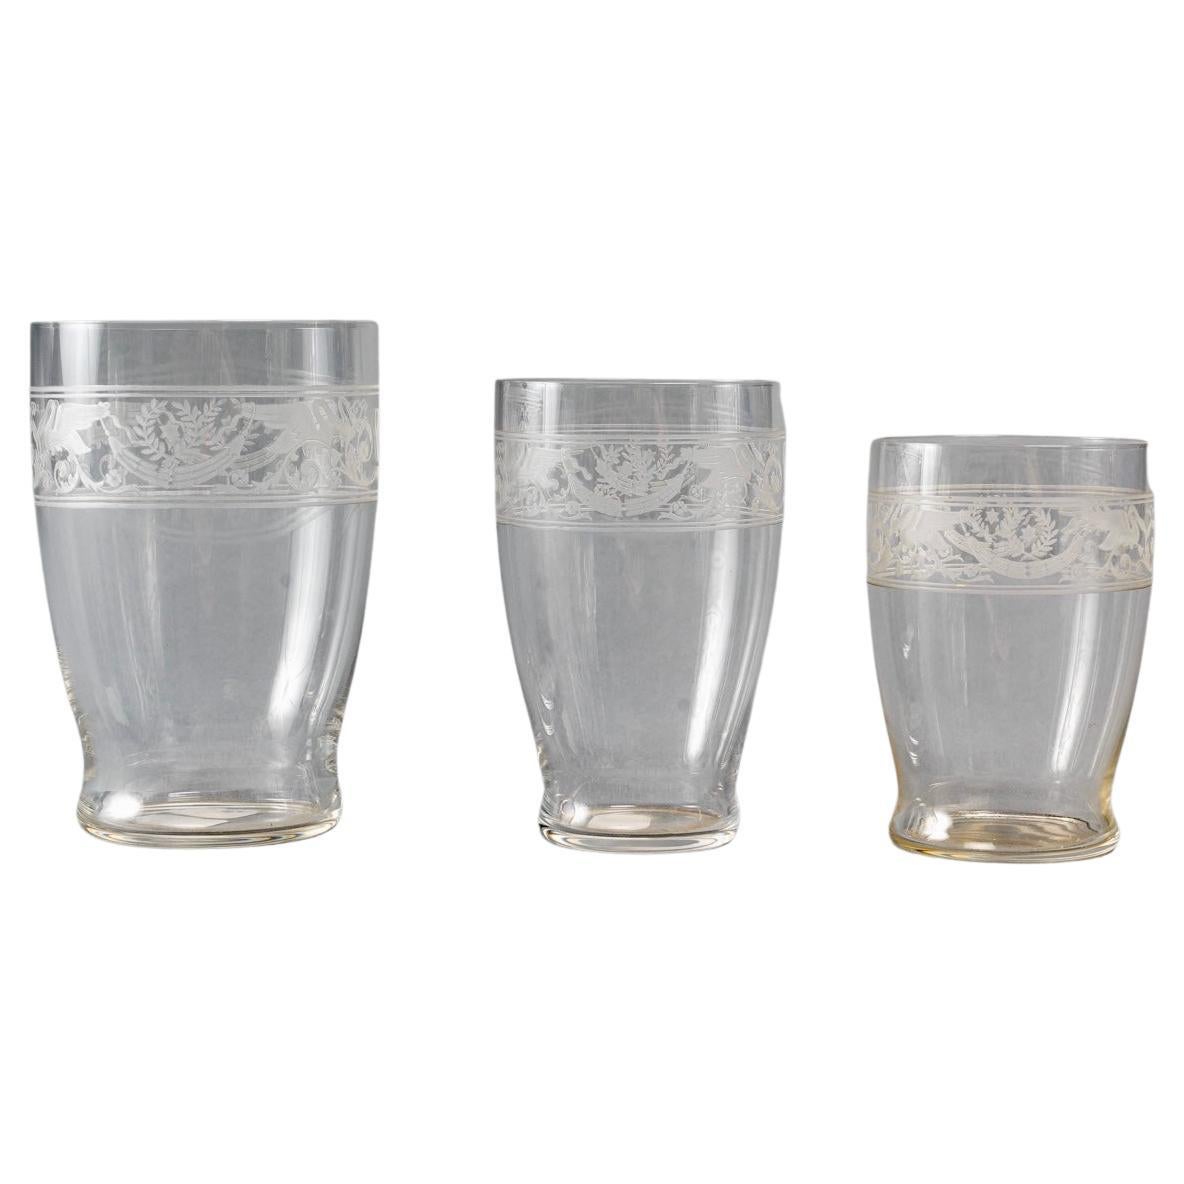 Baccarat, Tumblers Glasses Set Swans Crystal, 32 Pieces For Sale